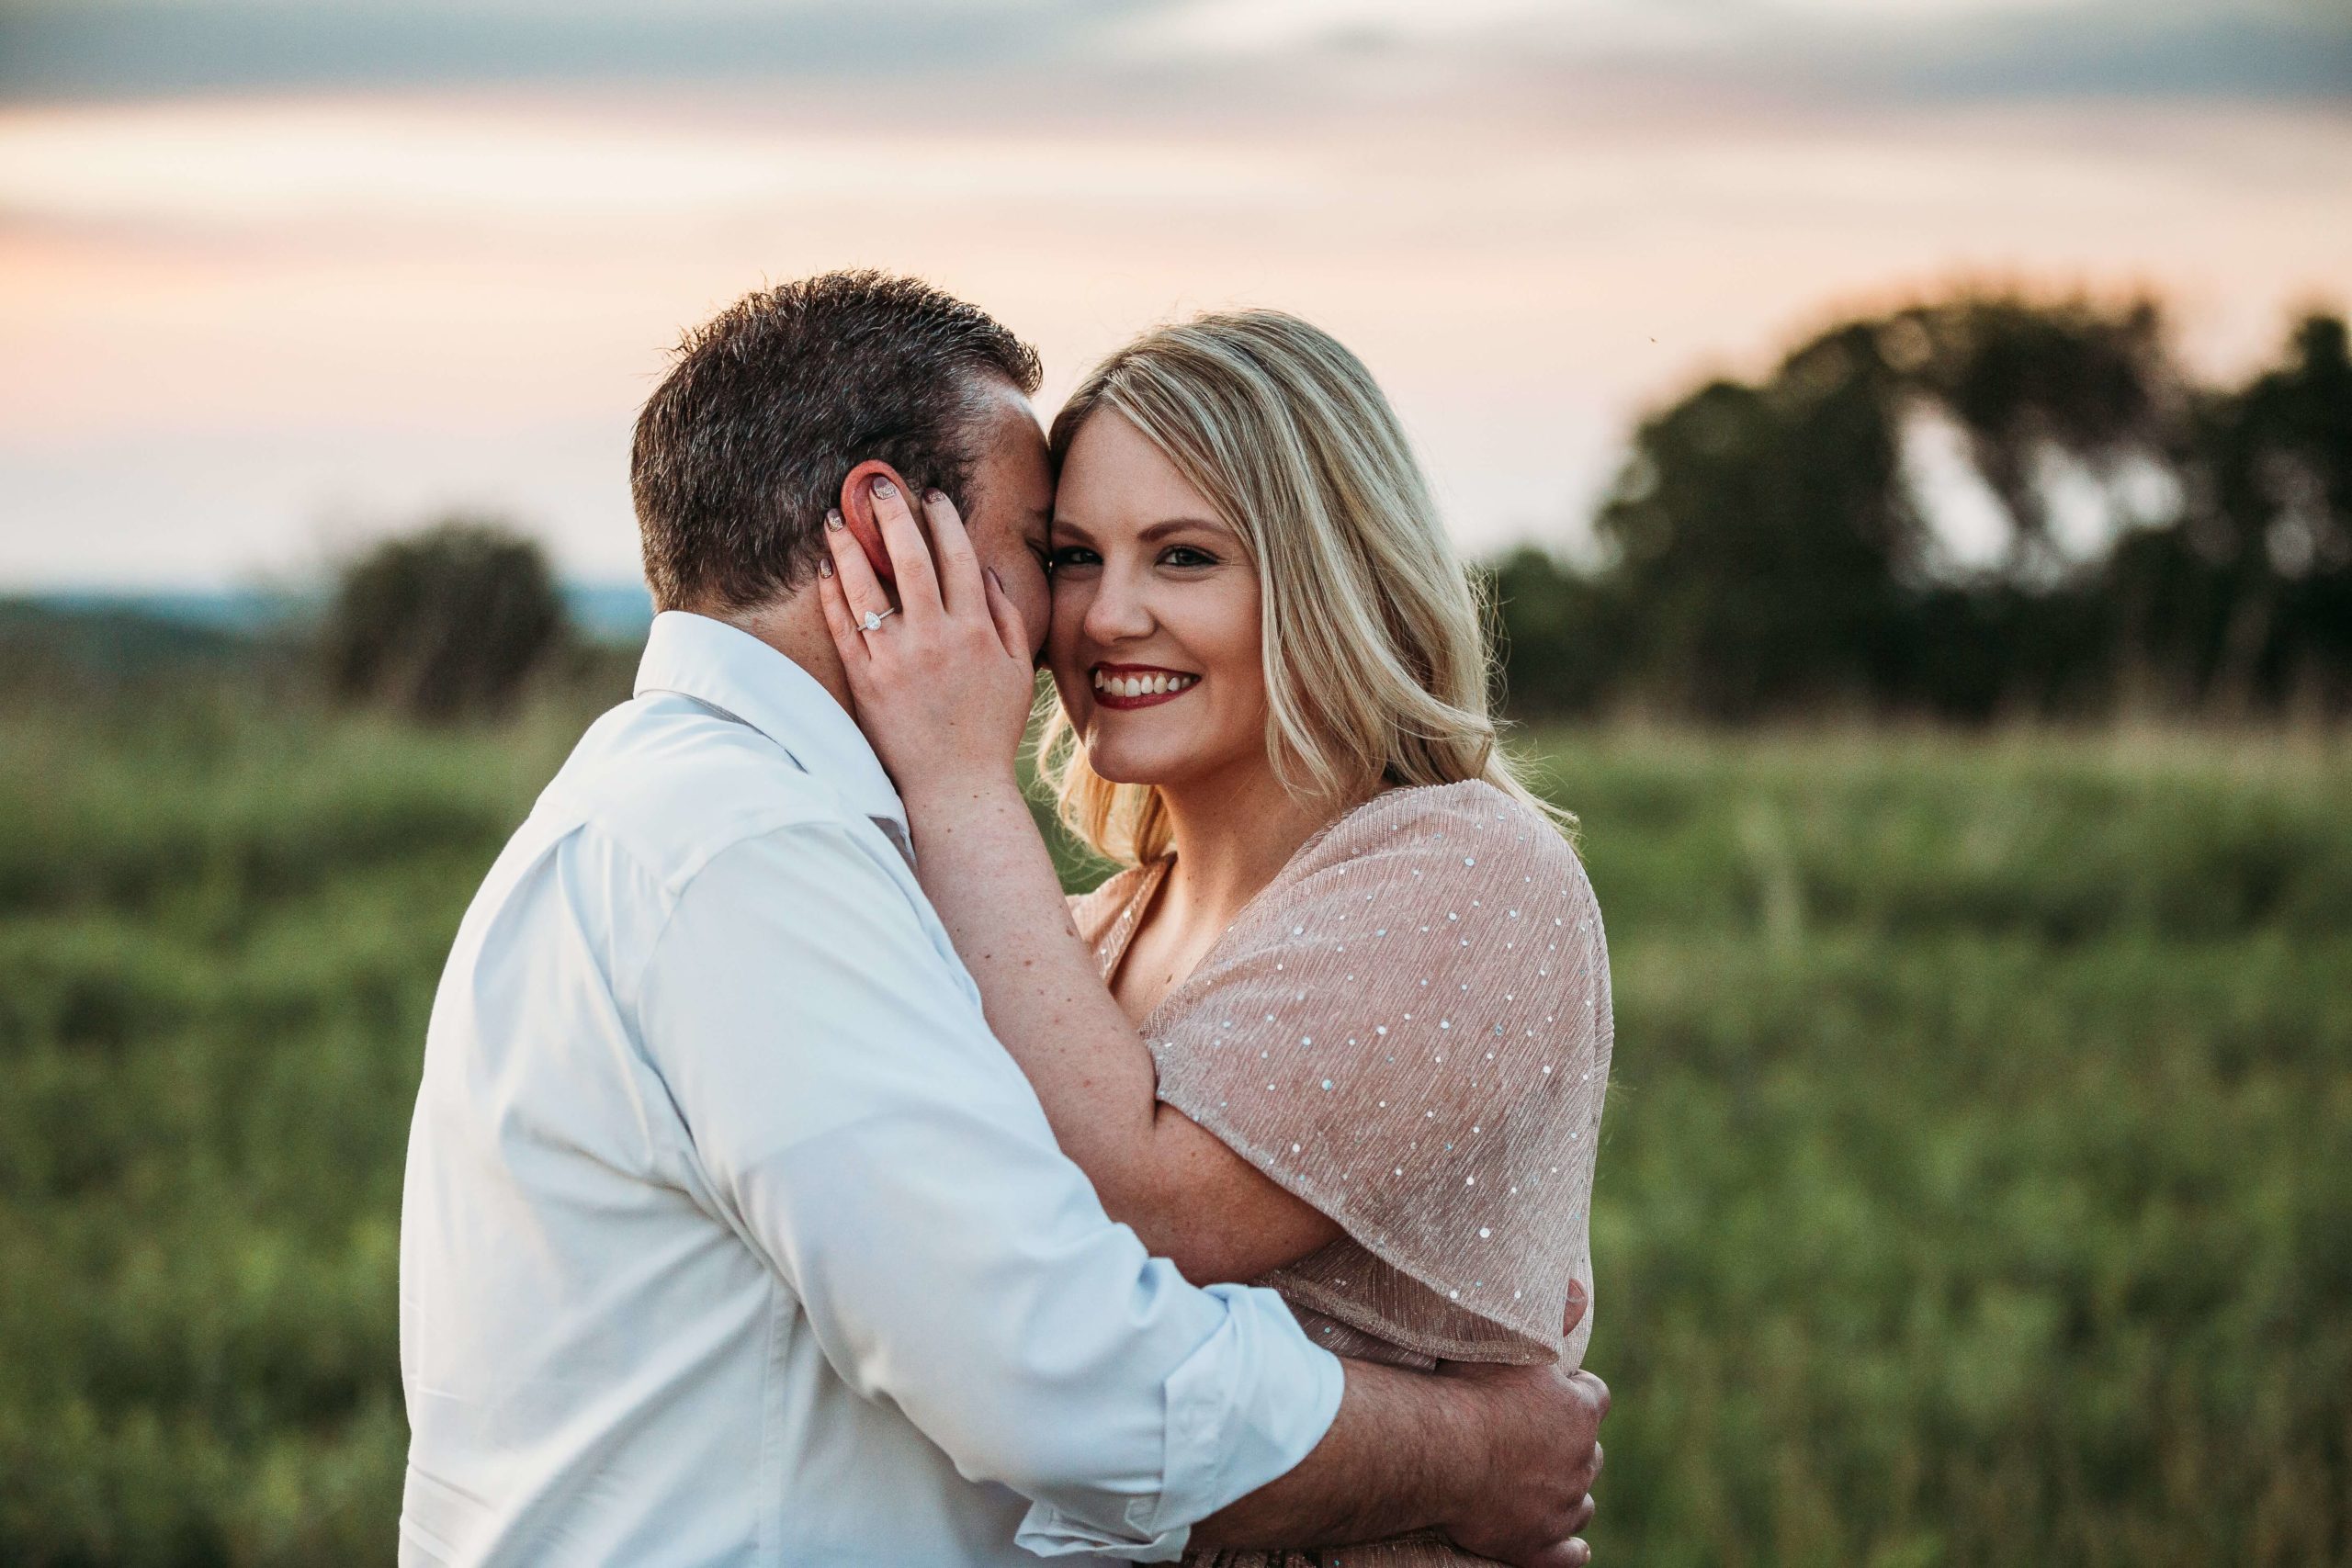 dubuque couple snuggling at sunset during their engagement session